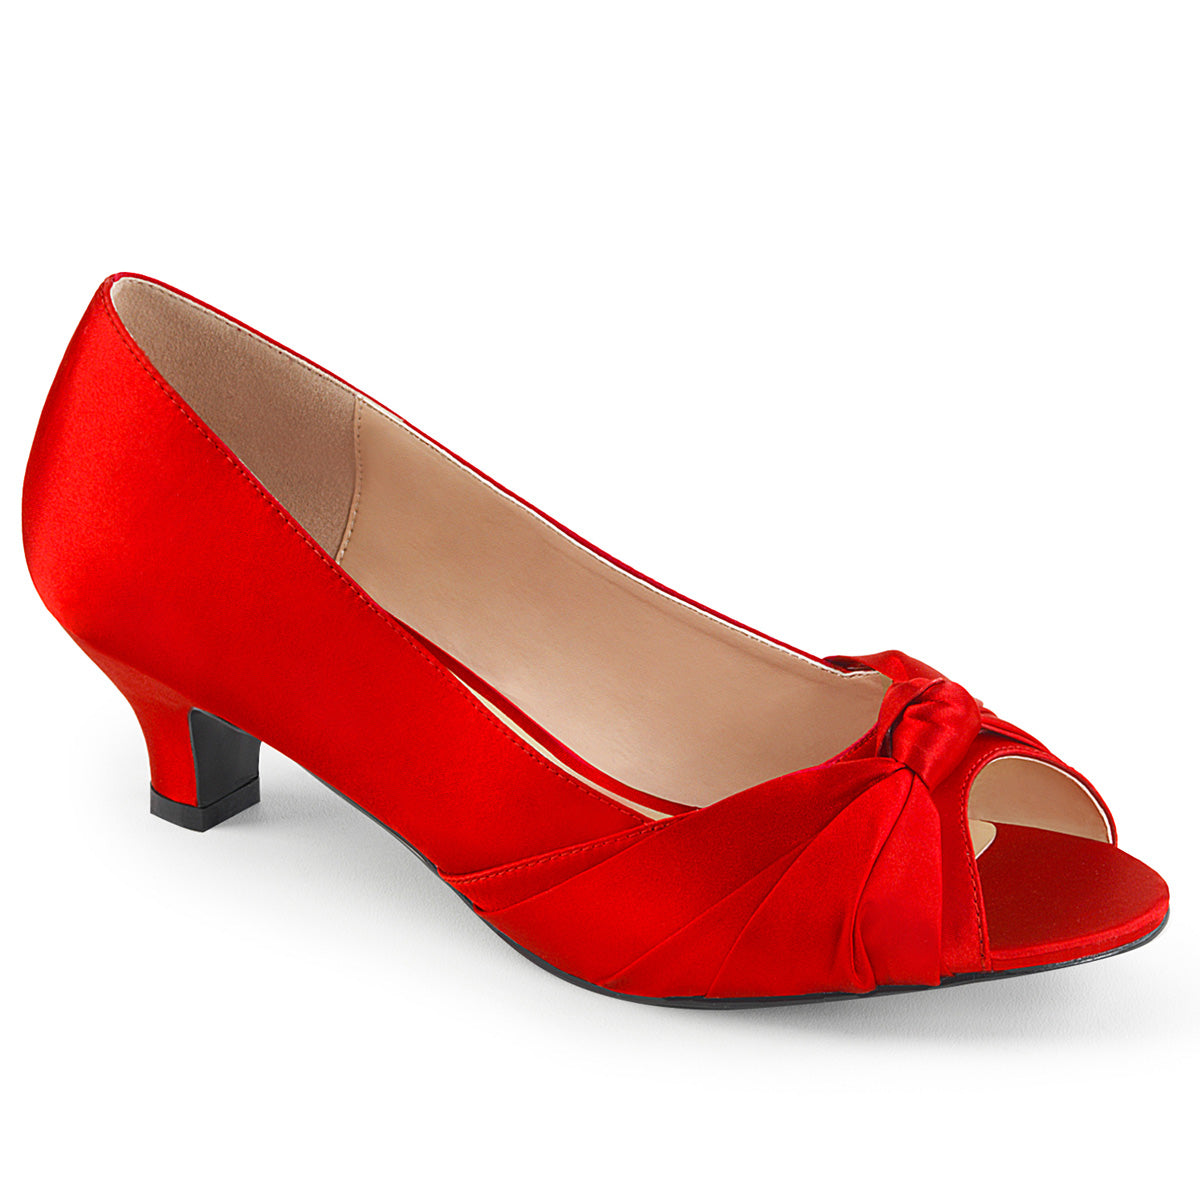 Pleaser Pink Label Womens Pumps FAB-422 Red Satin